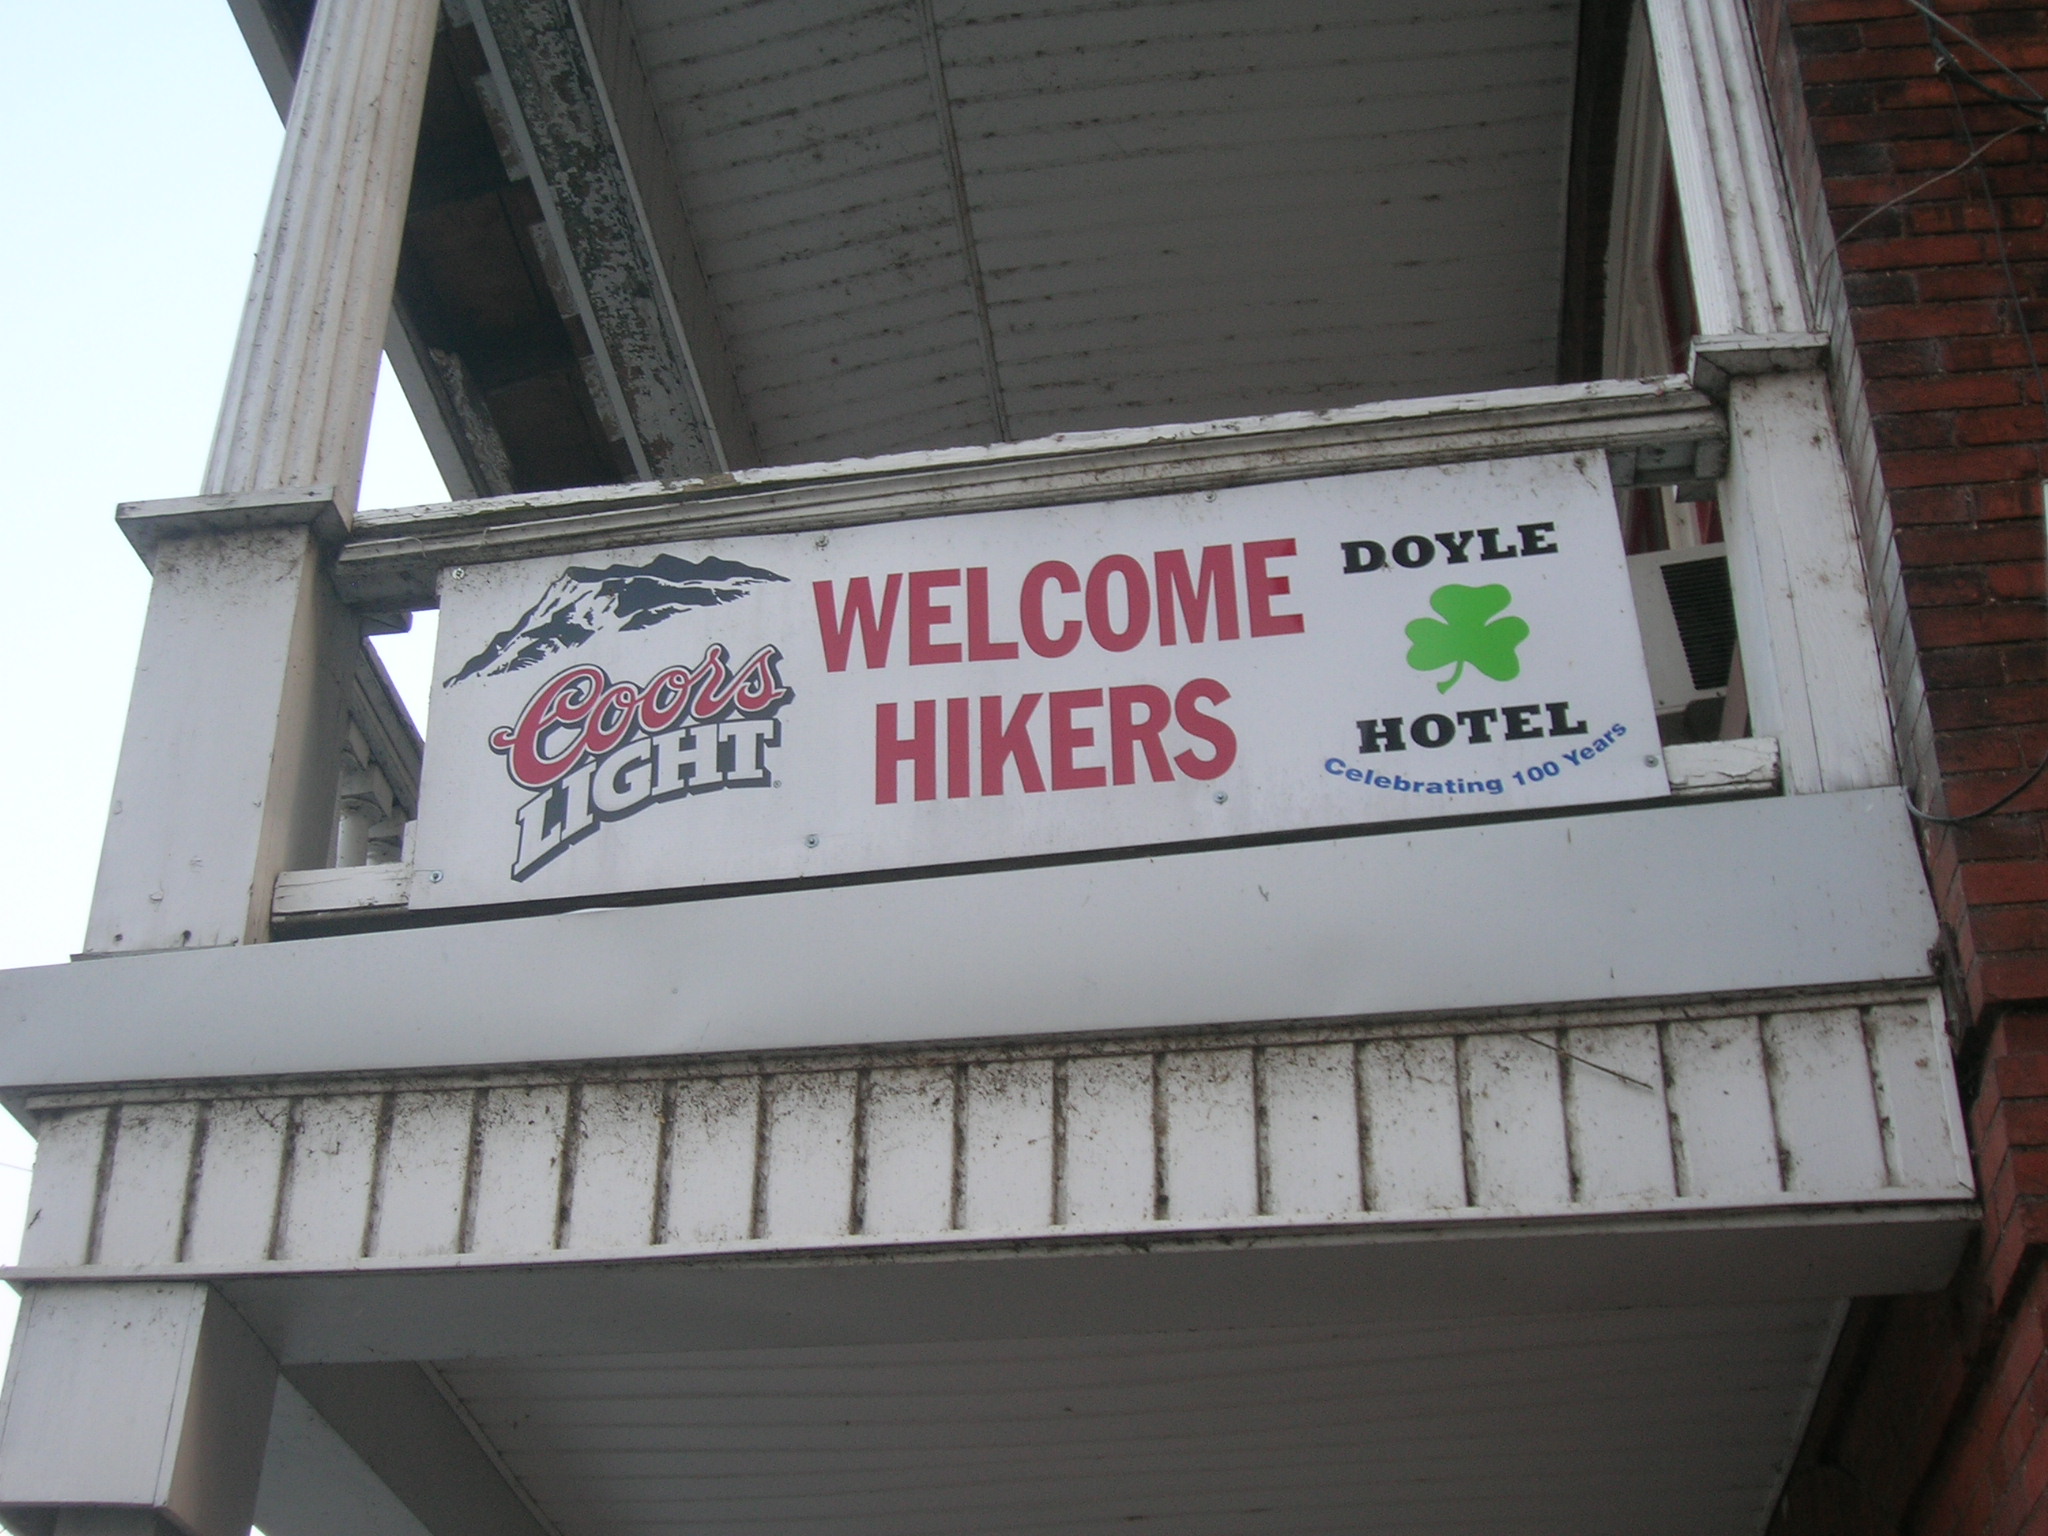 Hotel porch sign